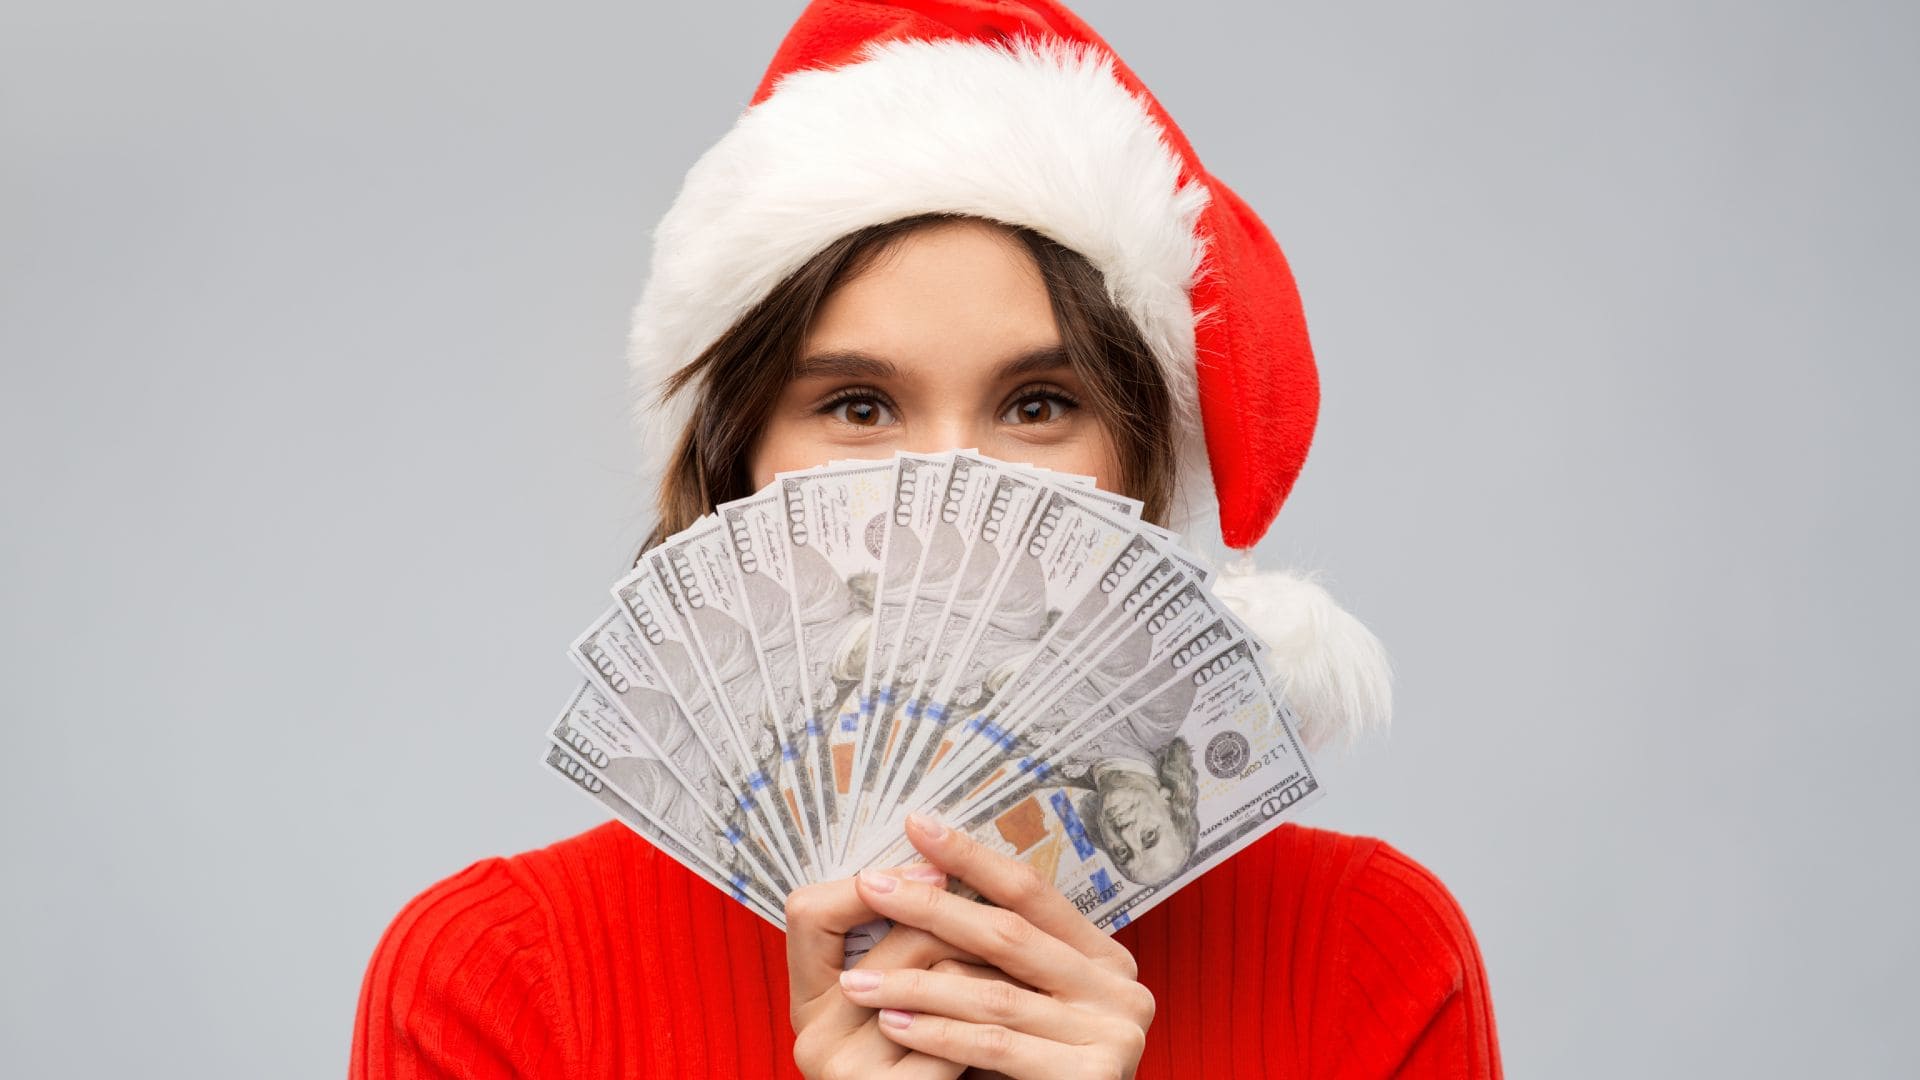 Not everyone could get Social Security money before Christmas